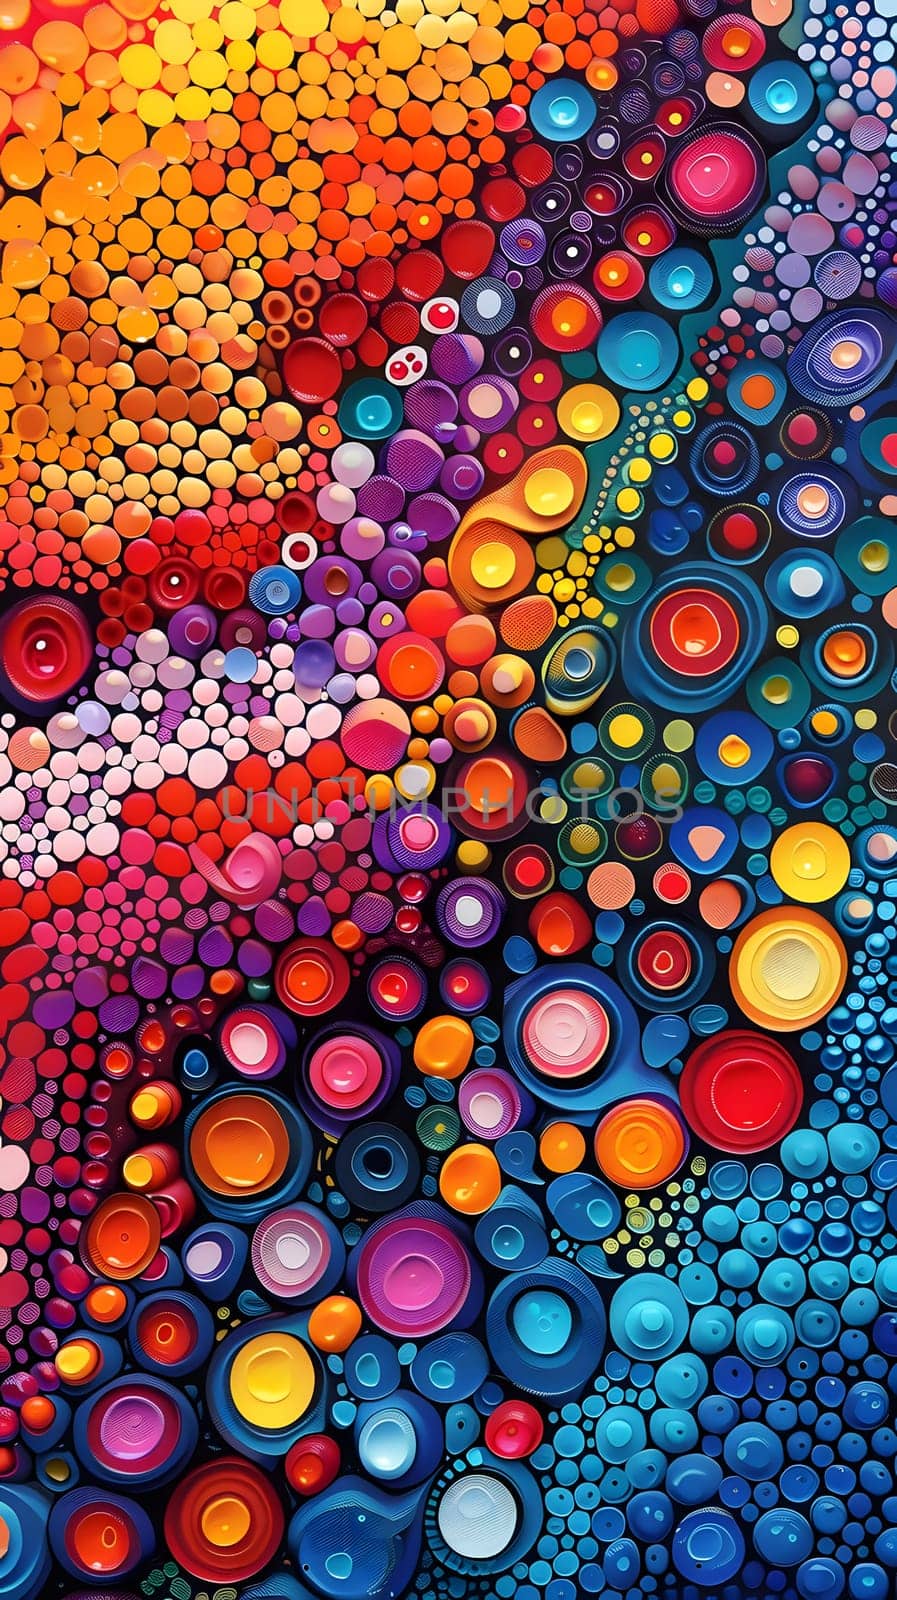 A closeup of a vibrant painting with circles and dots showcasing colorfulness, natureinspired art, intricate patterns, electric blue hues, symmetry, and captivating design